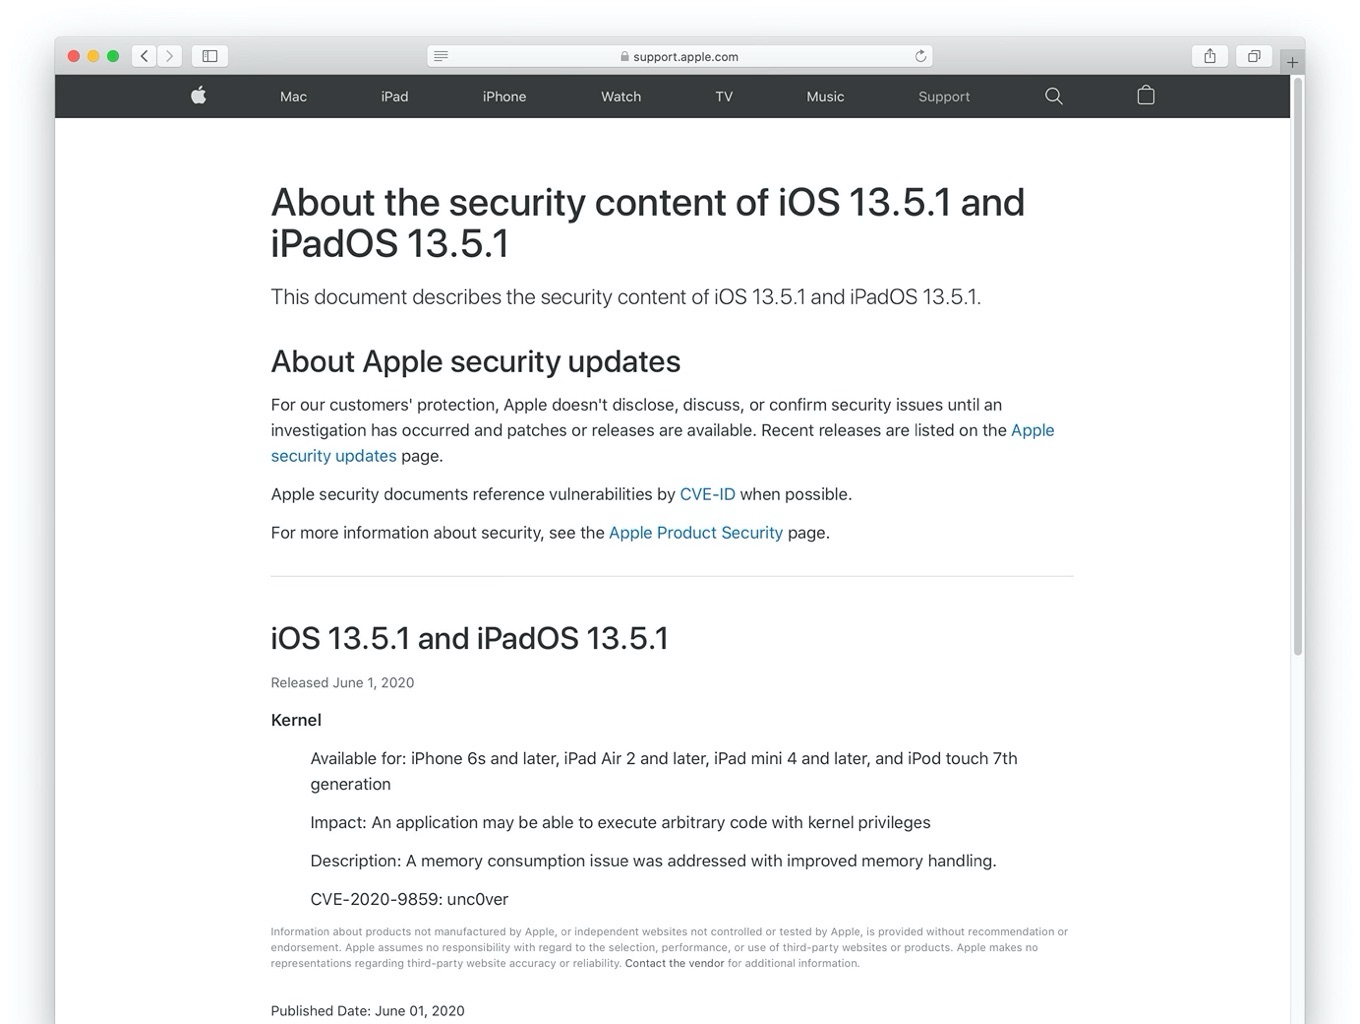 About the security content of iOS 13.5.1